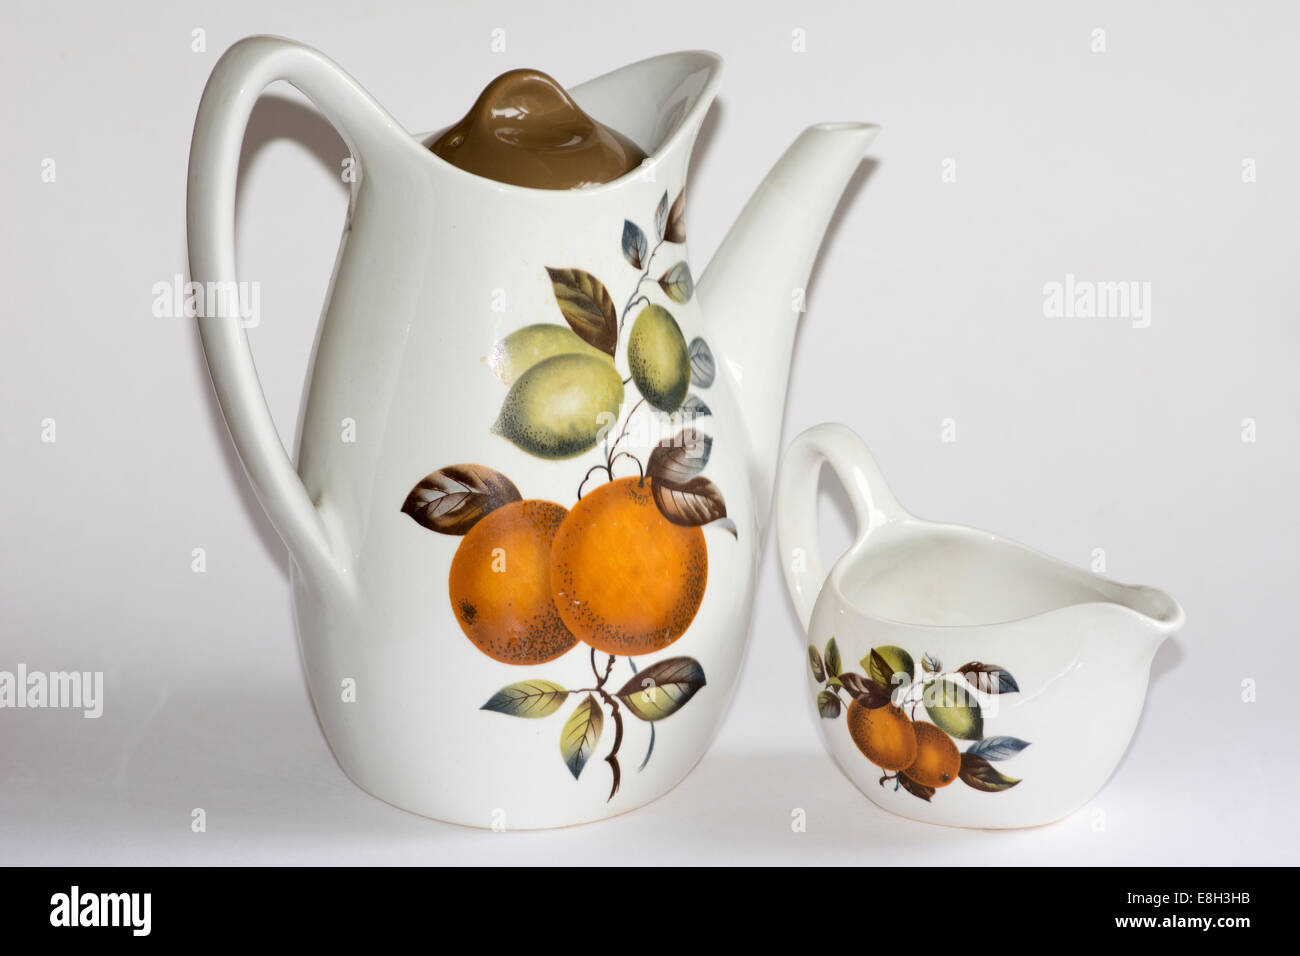 Midwinter oranges and lemons coffee pot and milk jug Stock Photo